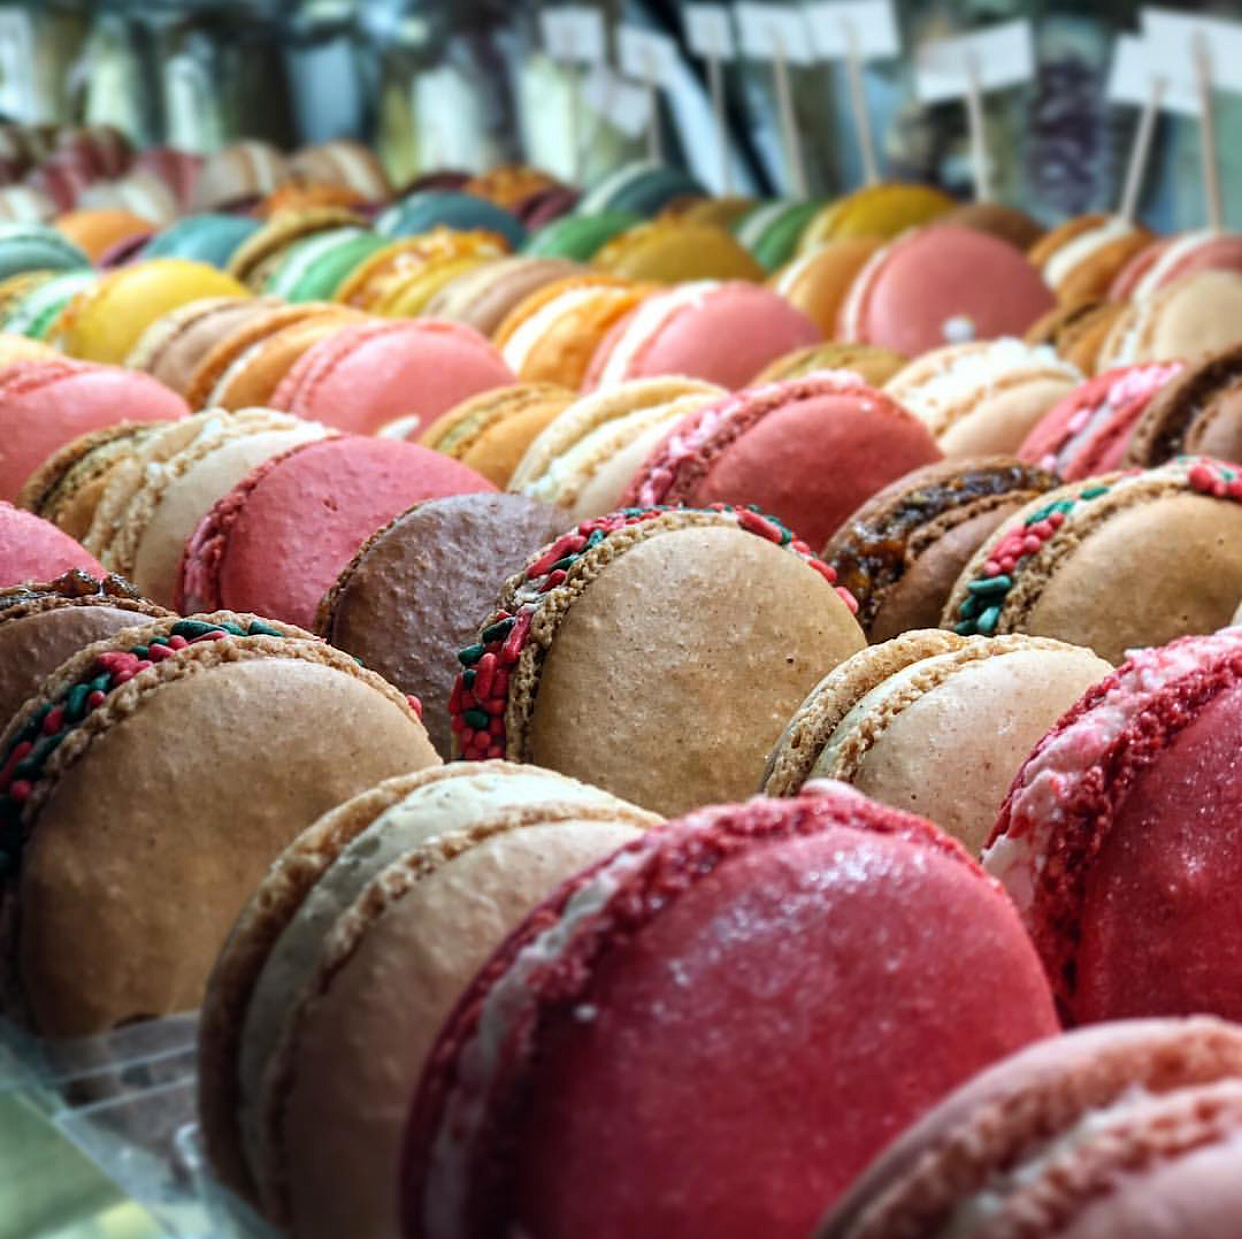 12pc. French Macarons